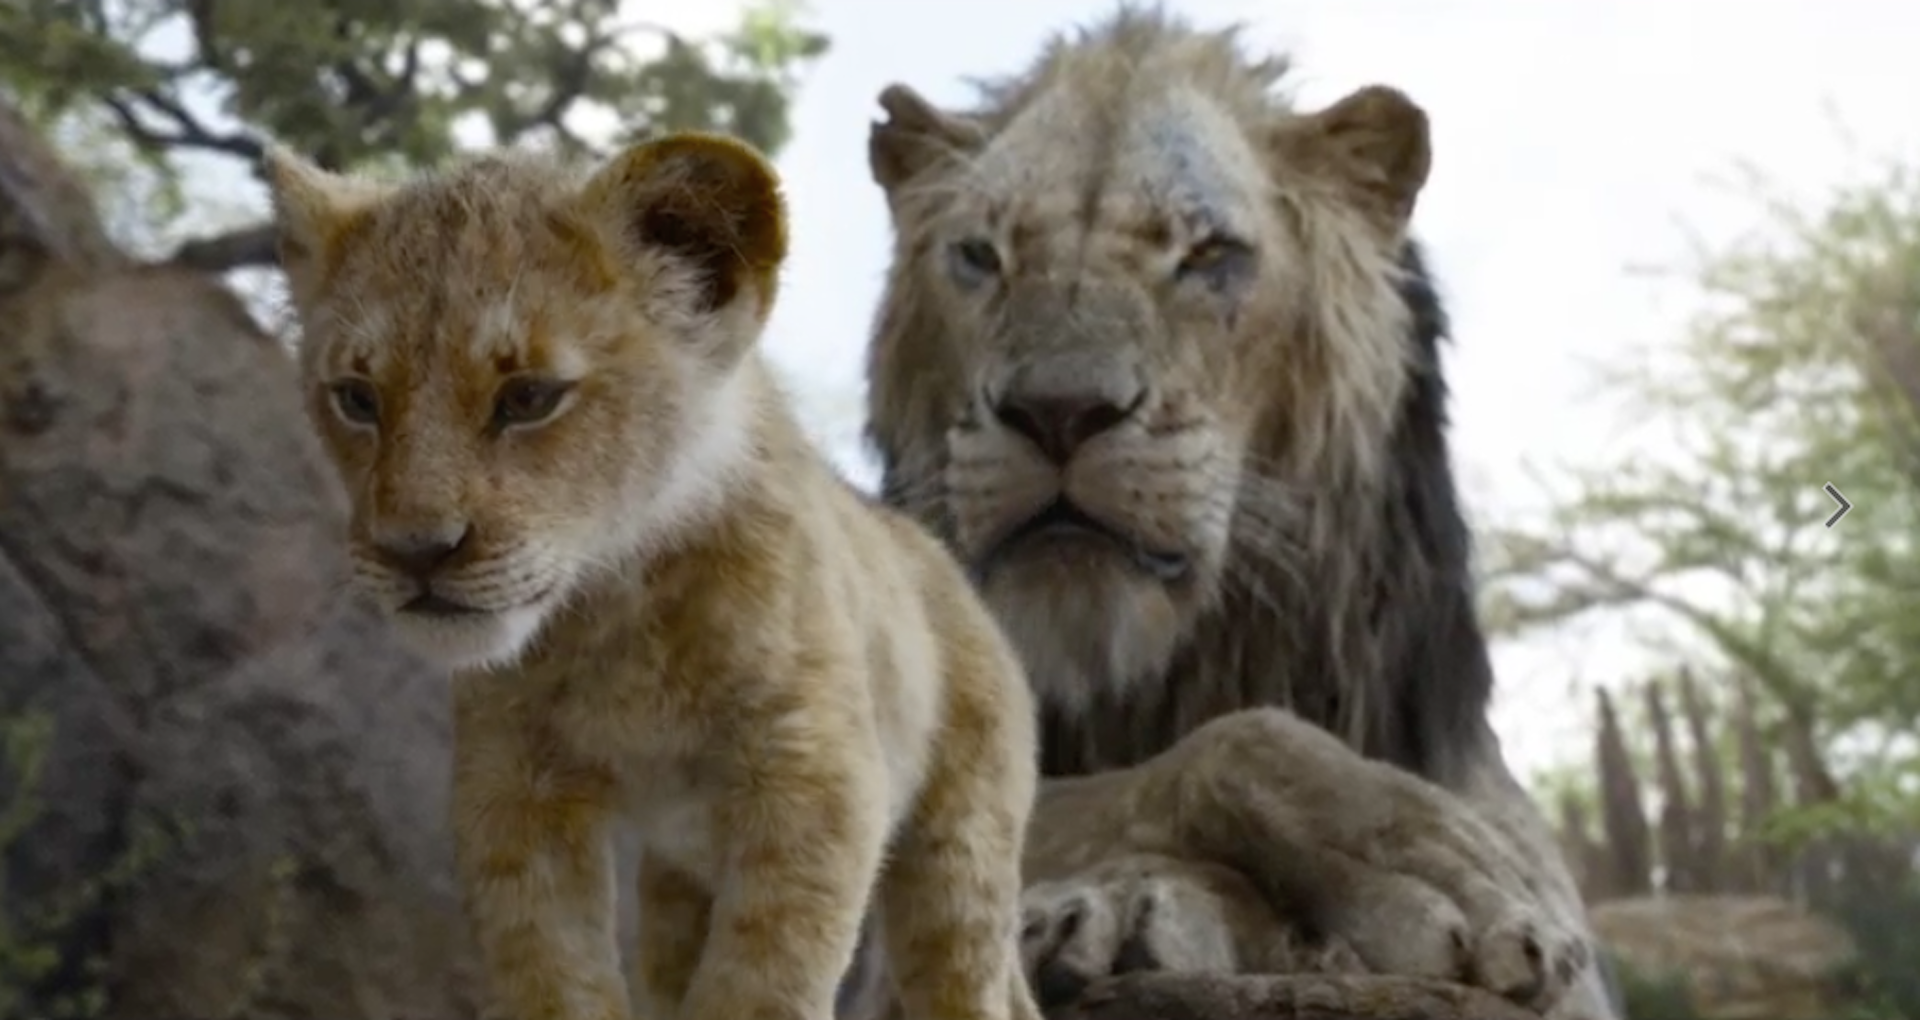 A Brand New 'Lion King' Trailer Shows Simba Fighting For His Destiny